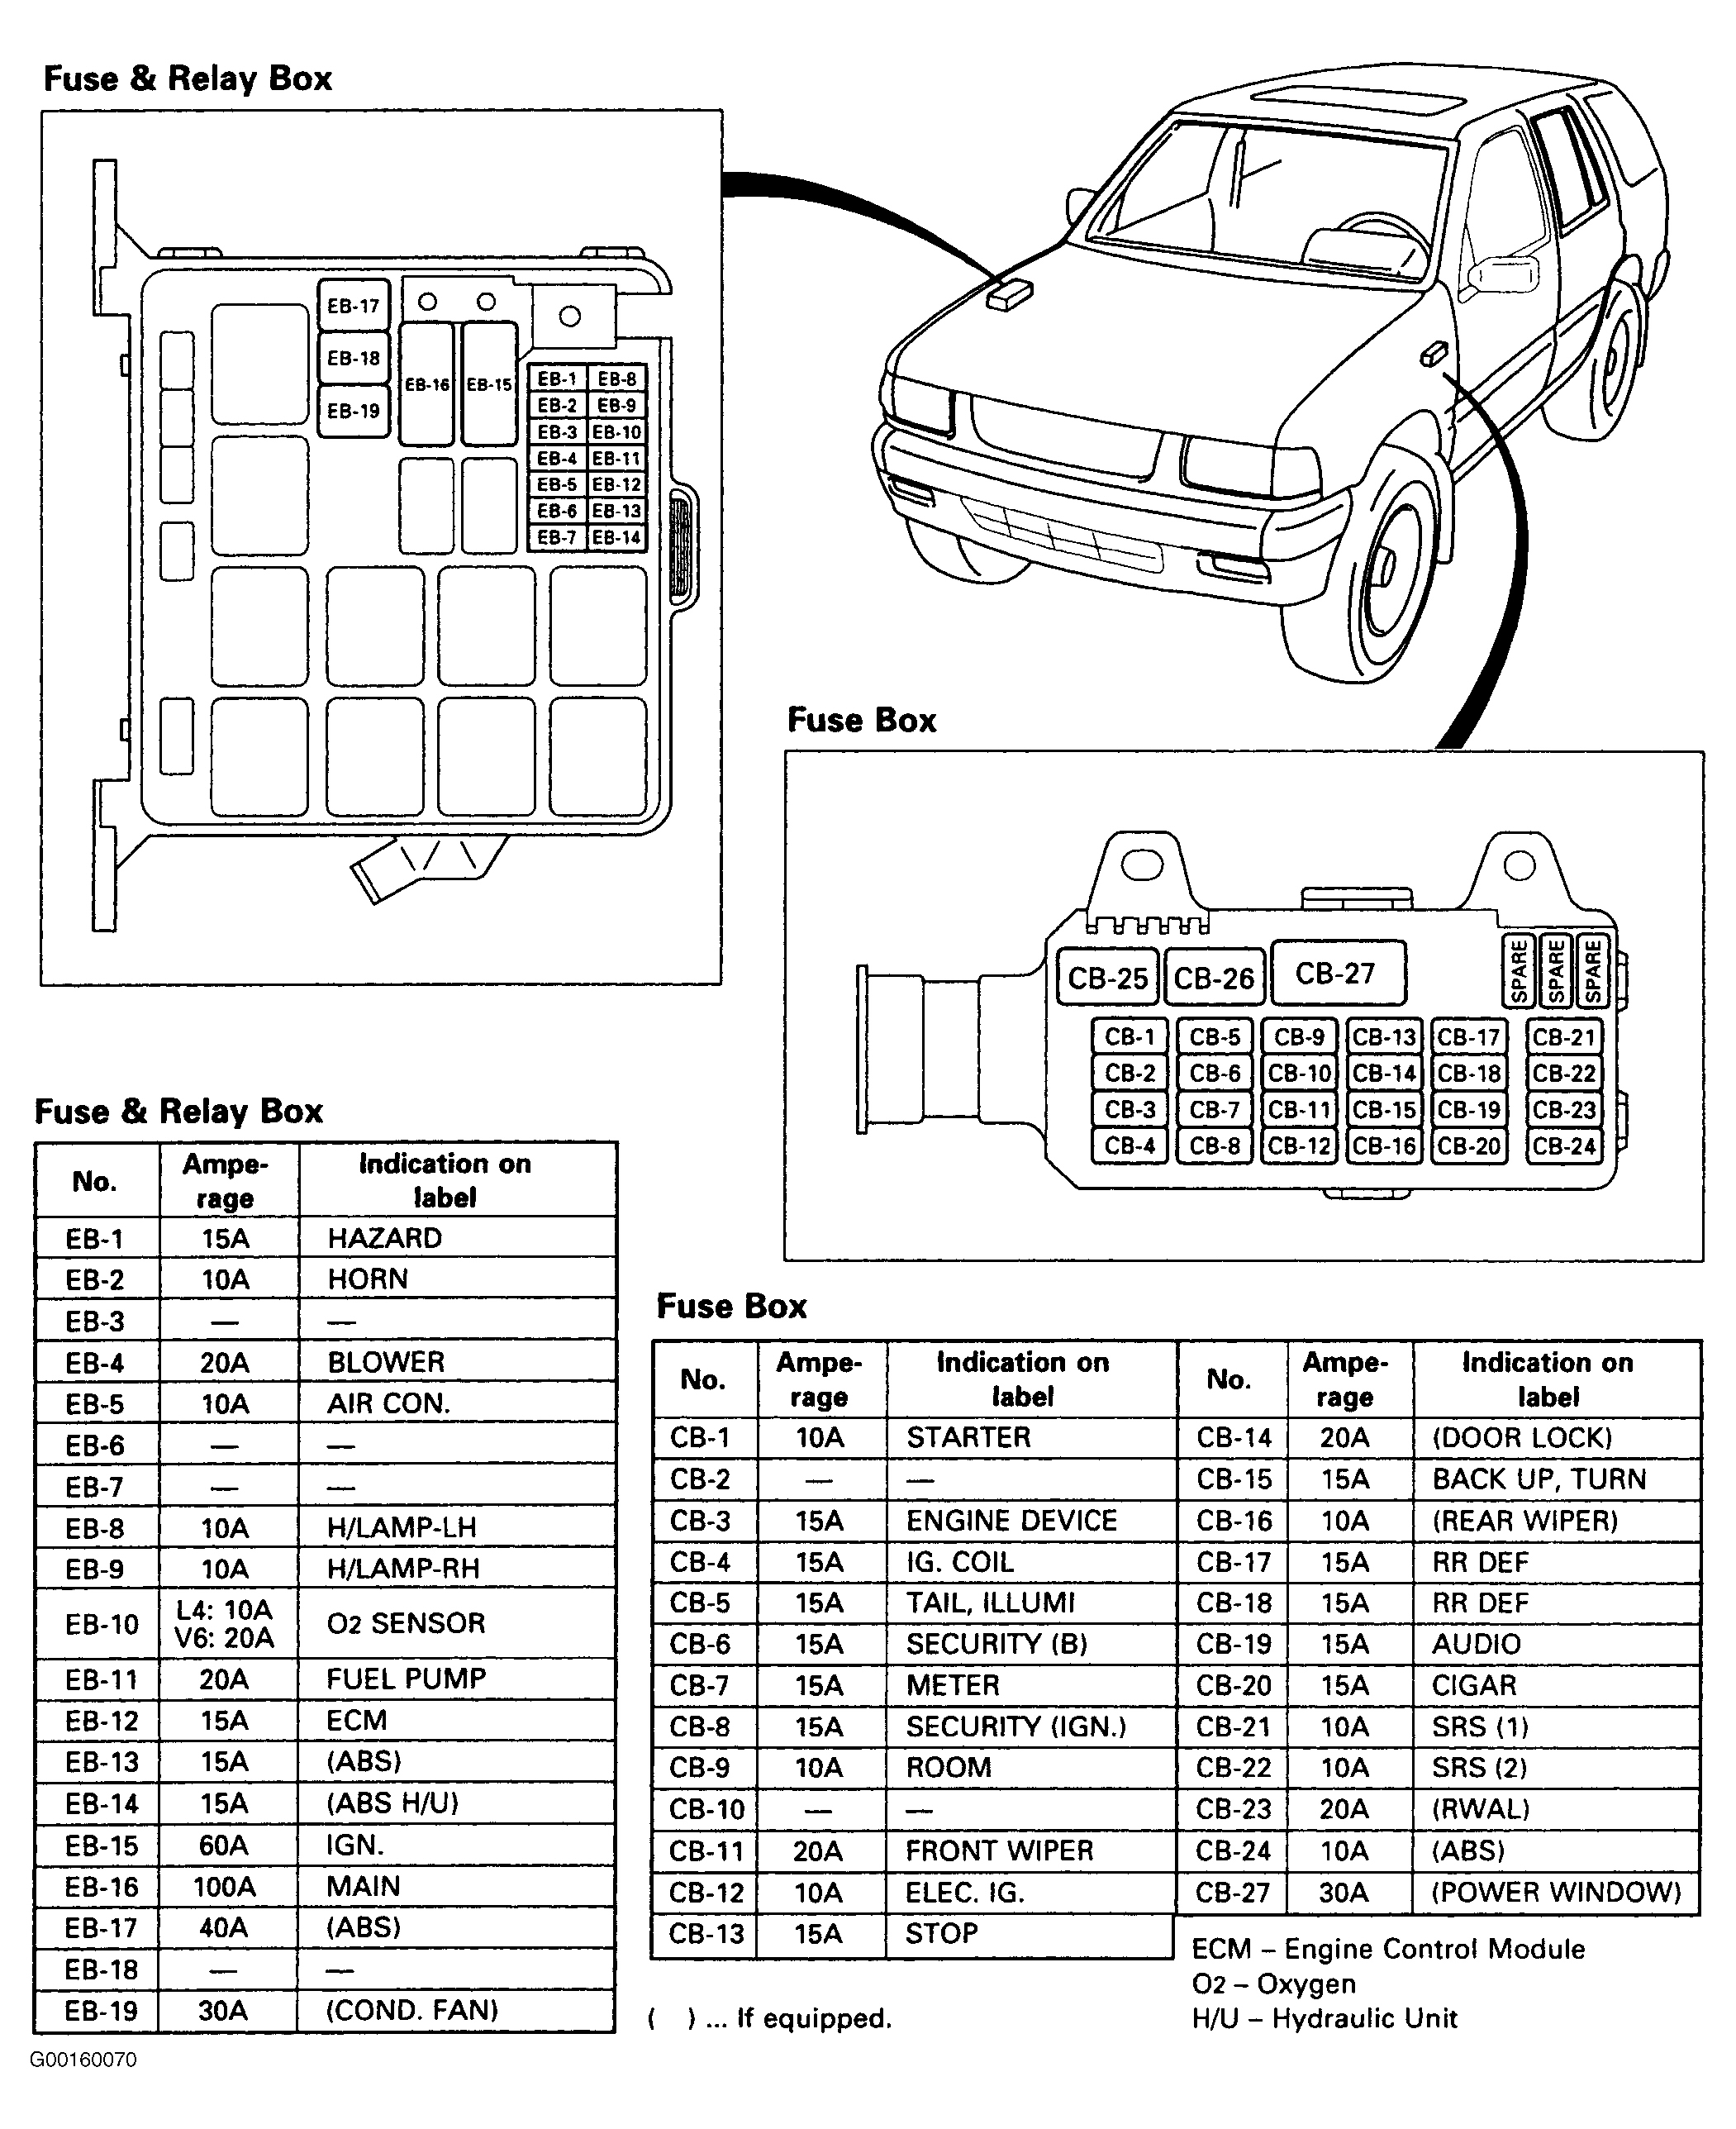 Isuzu Rodeo S 1998 - Component Locations -  Identifying Fuse & Relay Box, & Fuse Box Locations